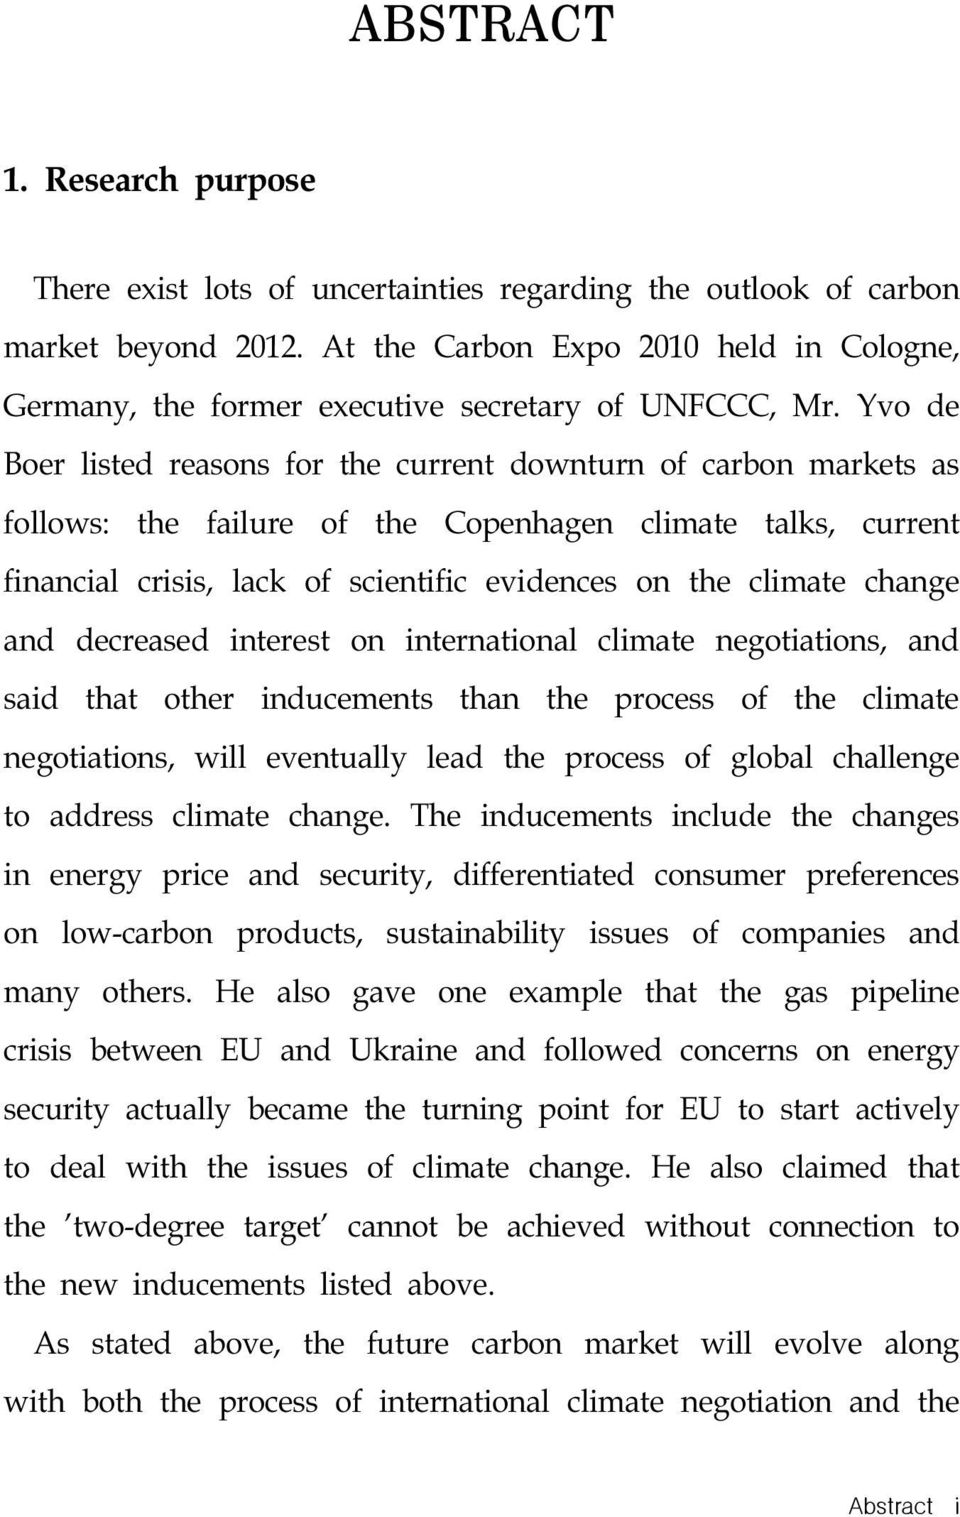 Yvo de Boer listed reasons for the current downturn of carbon markets as follows: the failure of the Copenhagen climate talks, current financial crisis, lack of scientific evidences on the climate